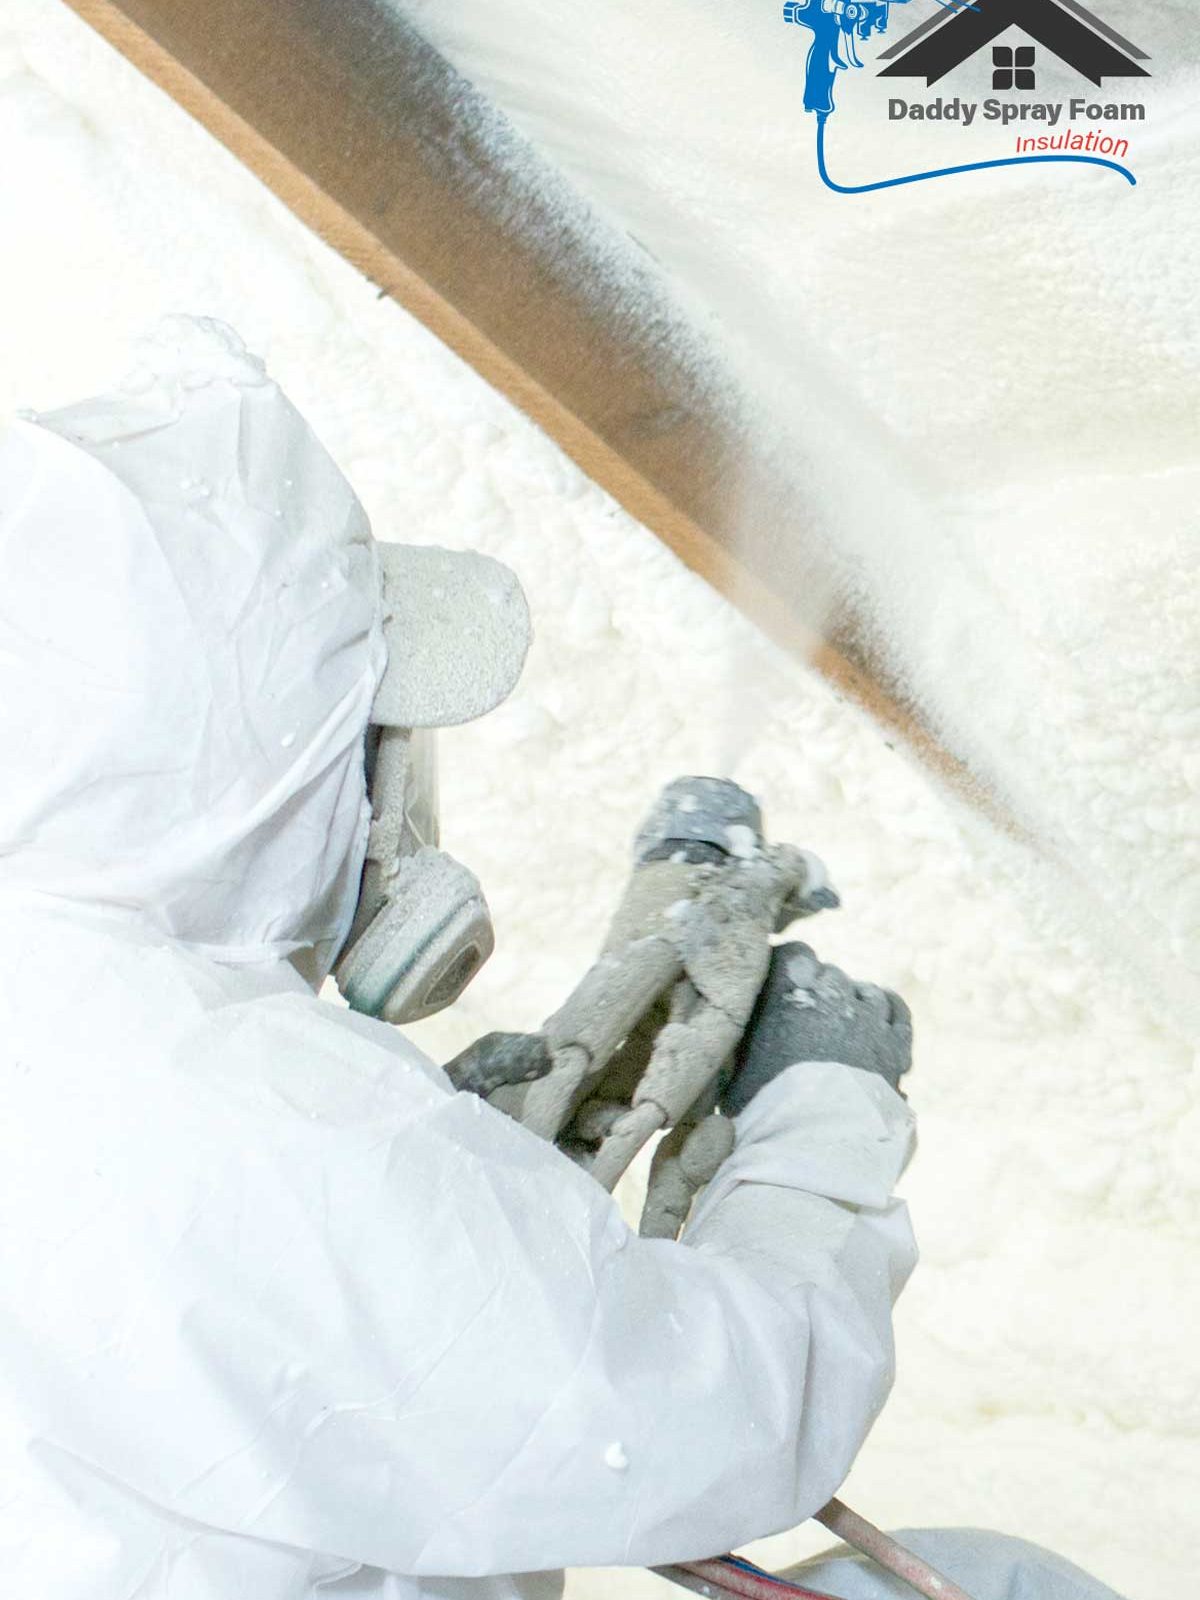 Who we are? Daddy spray insulation in Long Island New York